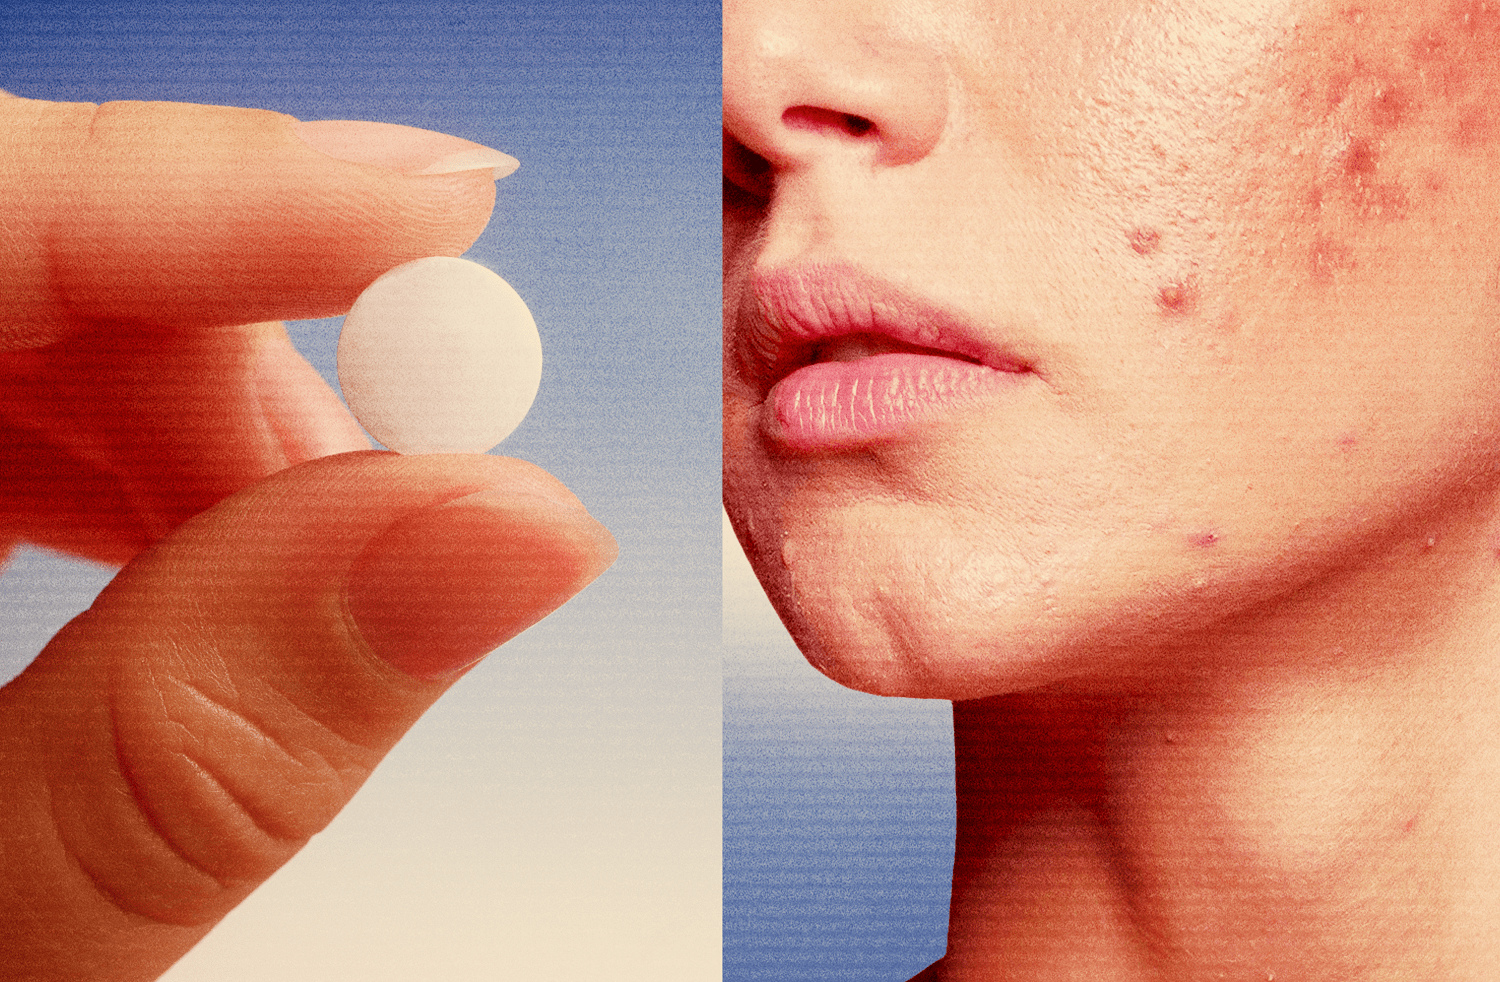 The most popular pill to treat women's acne is a blood pressure drug